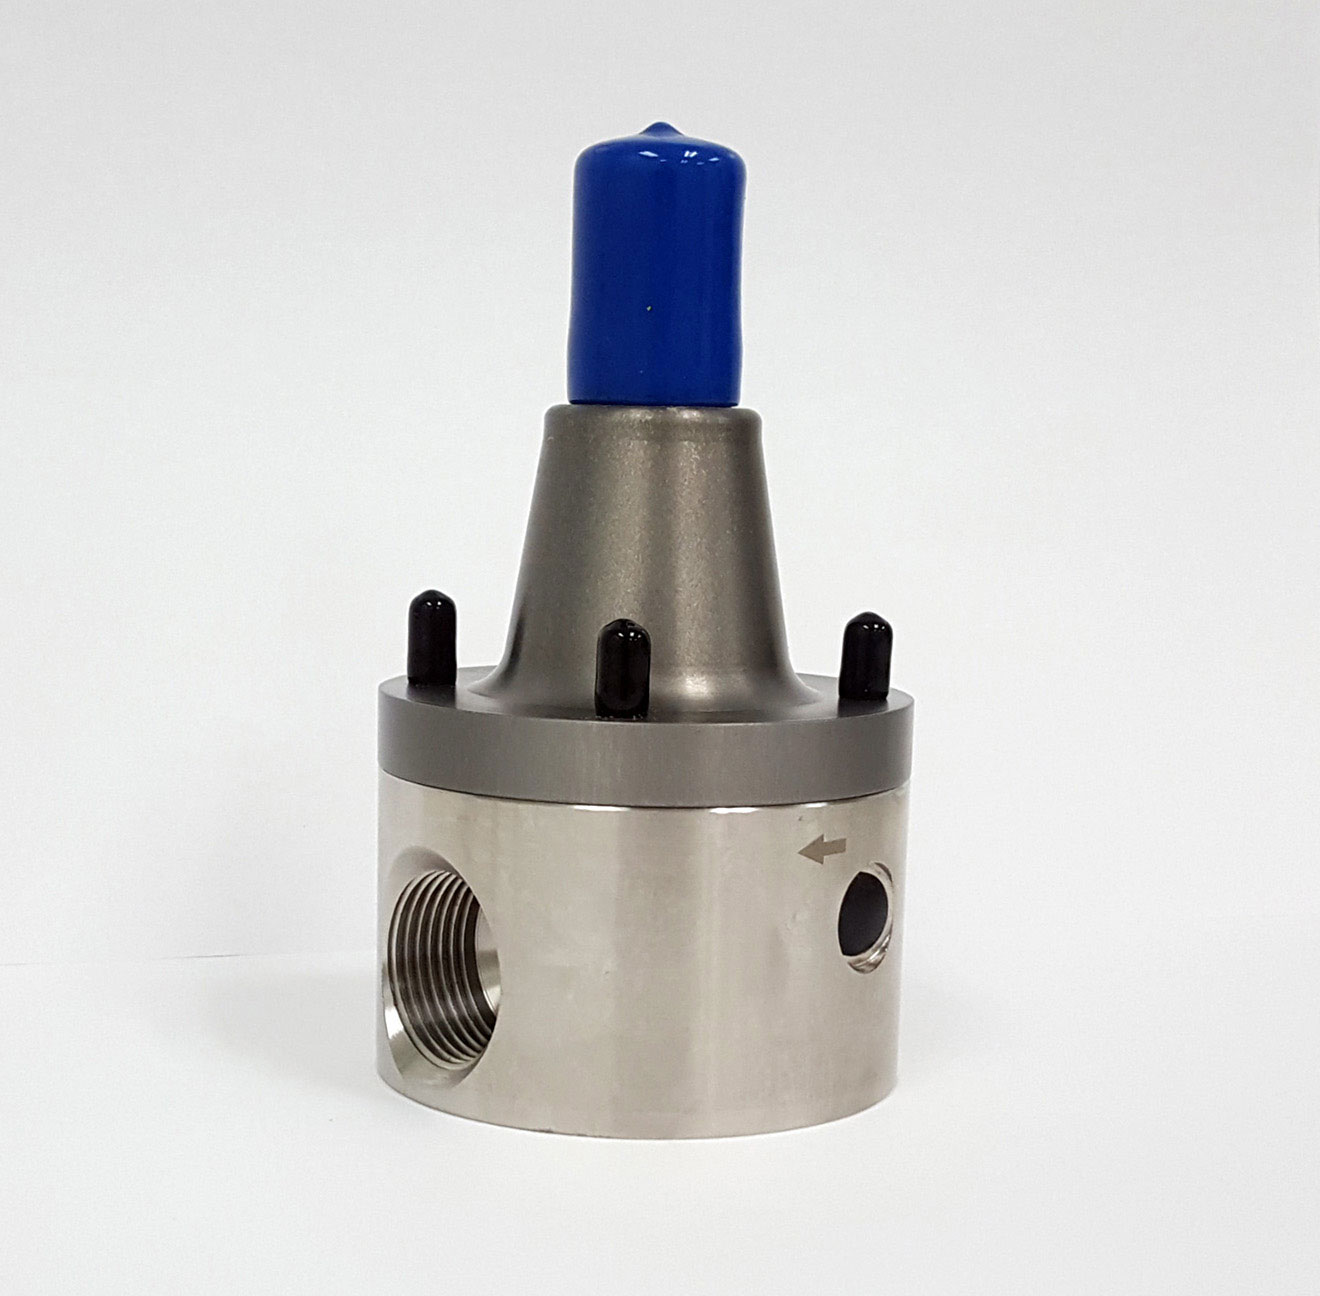 Eco Valve High Temperature Valve in Stainless Steel